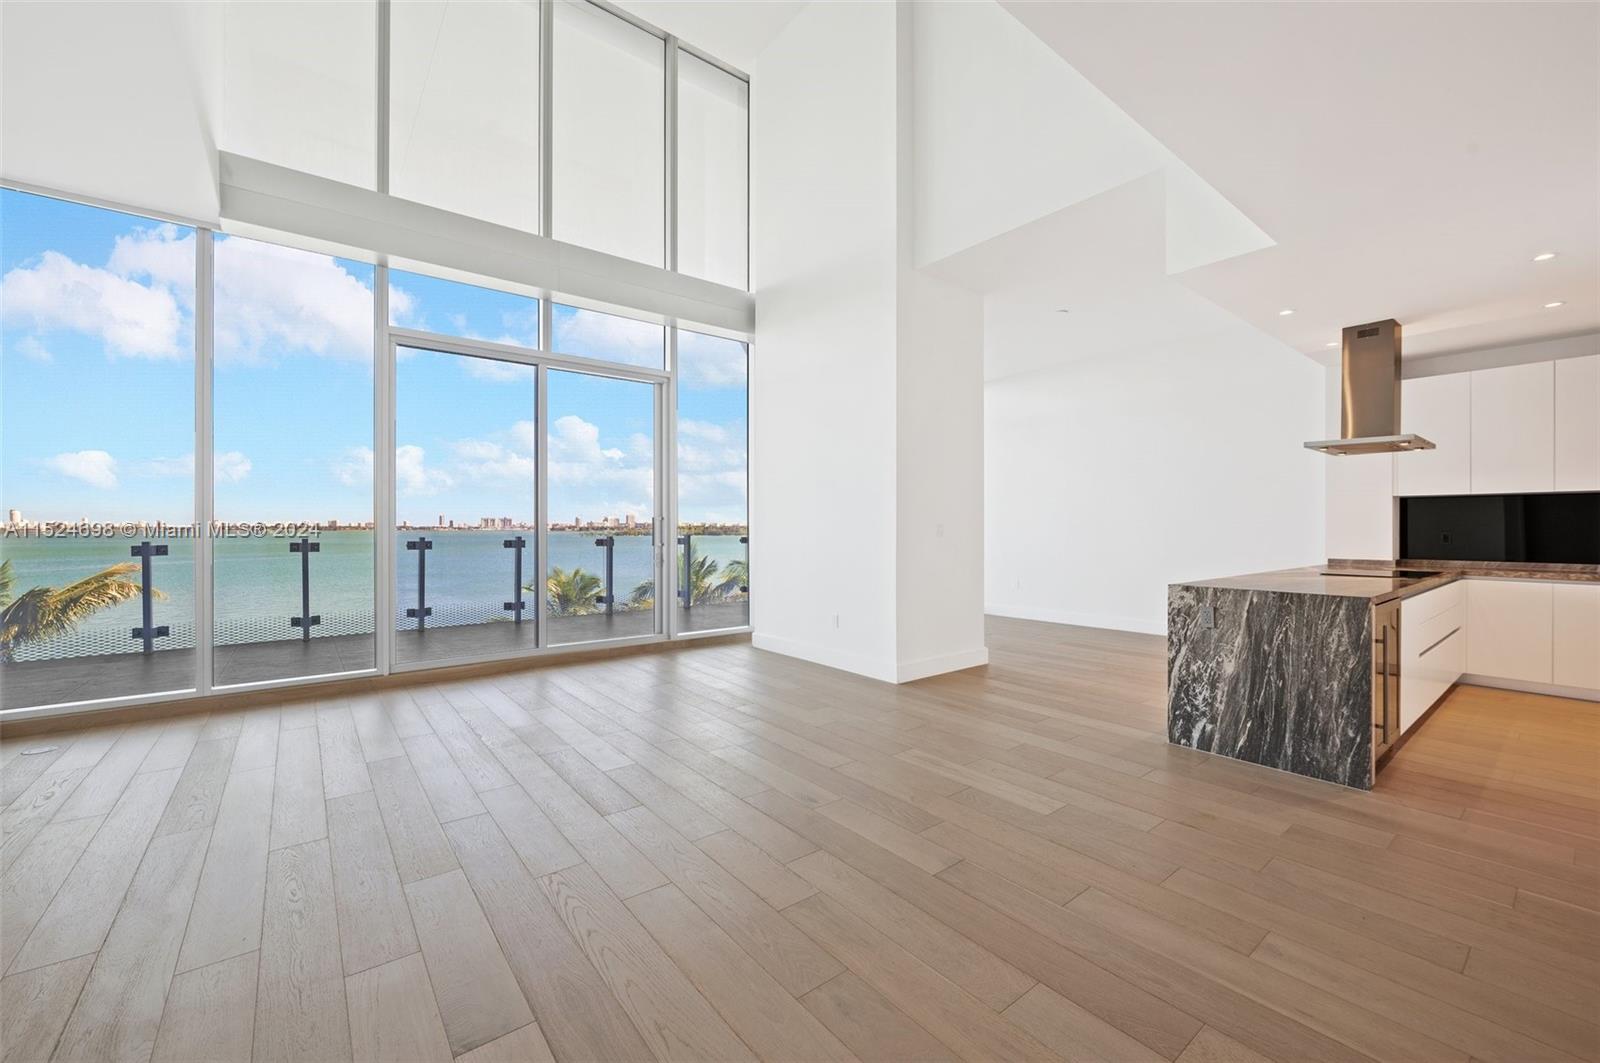 Unique & spectacular 2-level unit at the new Missoni Baia in Edgewater. This stunning property features breathtaking and unobstructed ocean views and is a unique floor plan, 1 of 3 in the building. Customized wooden floors throughout, 4 bedrooms, an enclosed study/gym, maid's quarters, laundry room and 6.5 bathrooms. Private foyer entrance directly into the unit, gourmet kitchen with sub-zero & Wolf appliances, Italkraft cabinetry, marble countertops, ample storage, oversized balcony, double height ceilings, spacious living areas, floor-to-ceiling windows. Amenities include top of the line fitness center, three pools, tennis court, BBQ area, kid's playroom, sauna/spa & more. The unit has access from both levels 4 & 5.